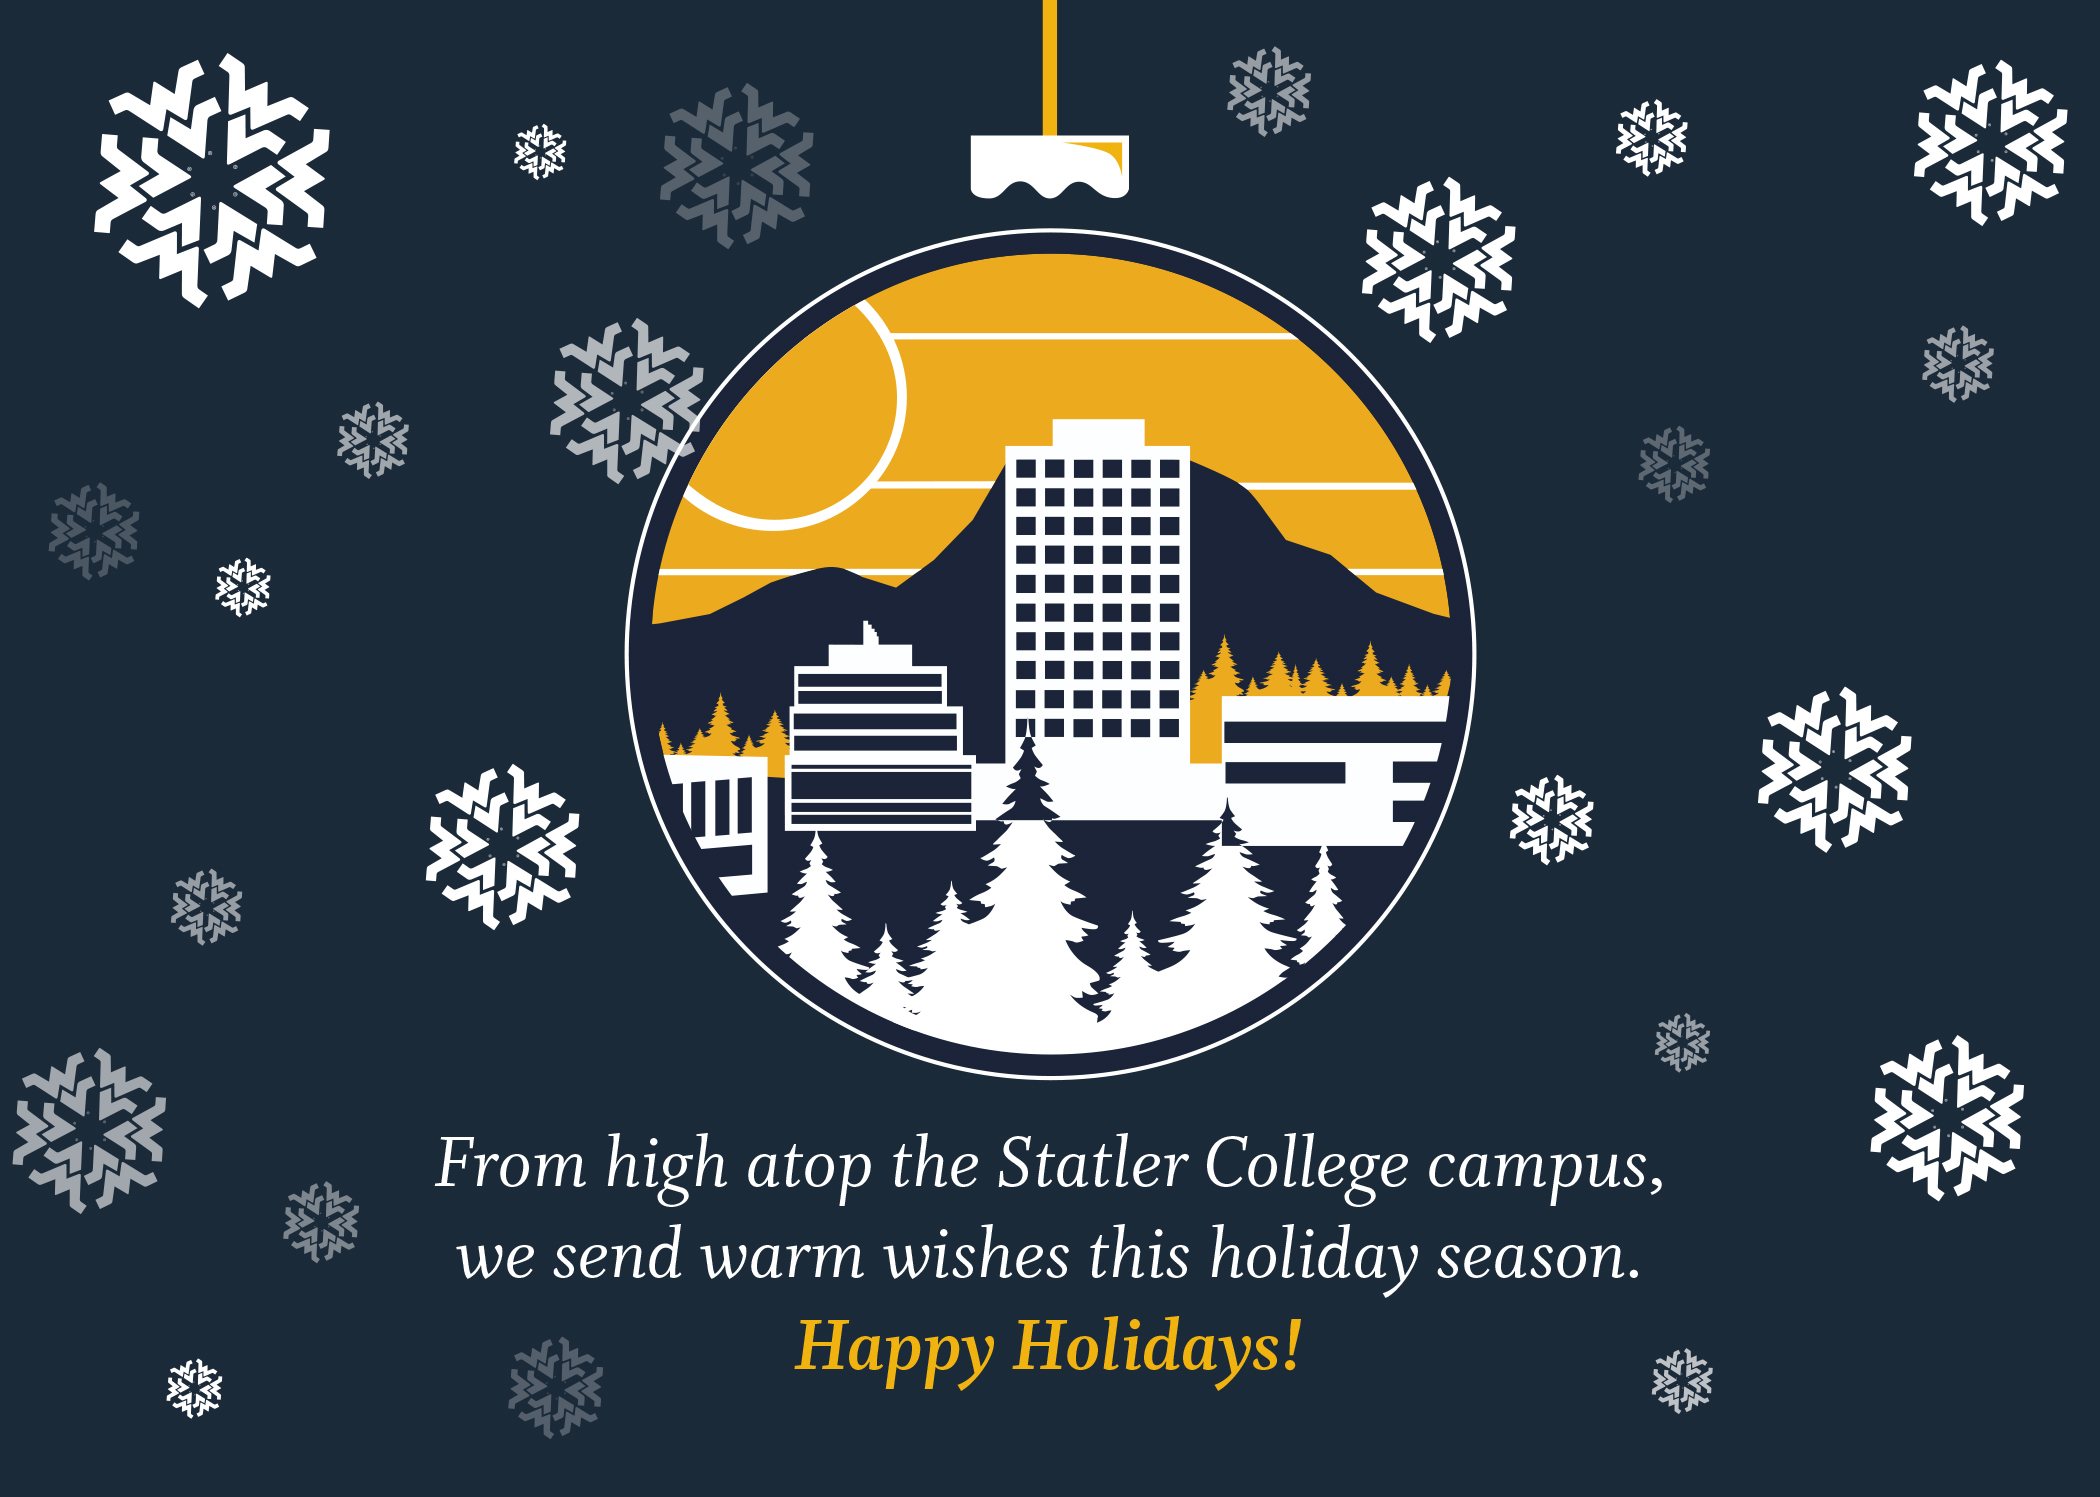 Illustration of Statler's campus building and snowflakes - From high atop the Statler College campus, we send warm wishes this holiday season. Happy Holidays!